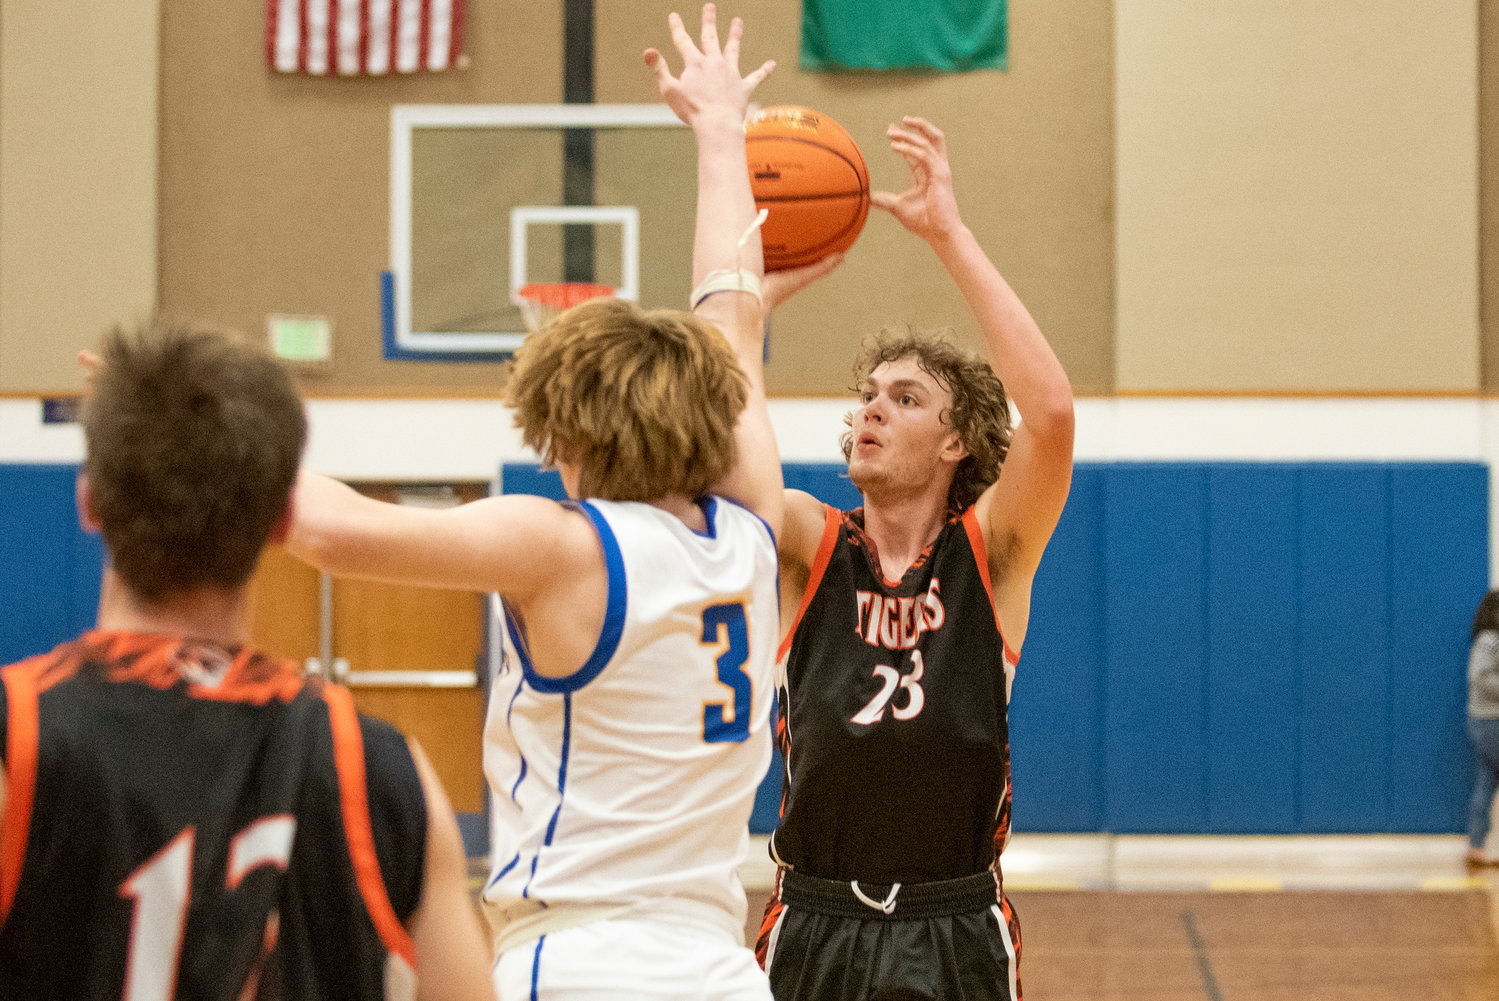 Centralia's Cole Wasson (23) lines up a 3-point shot against Rochester on Jan. 19.